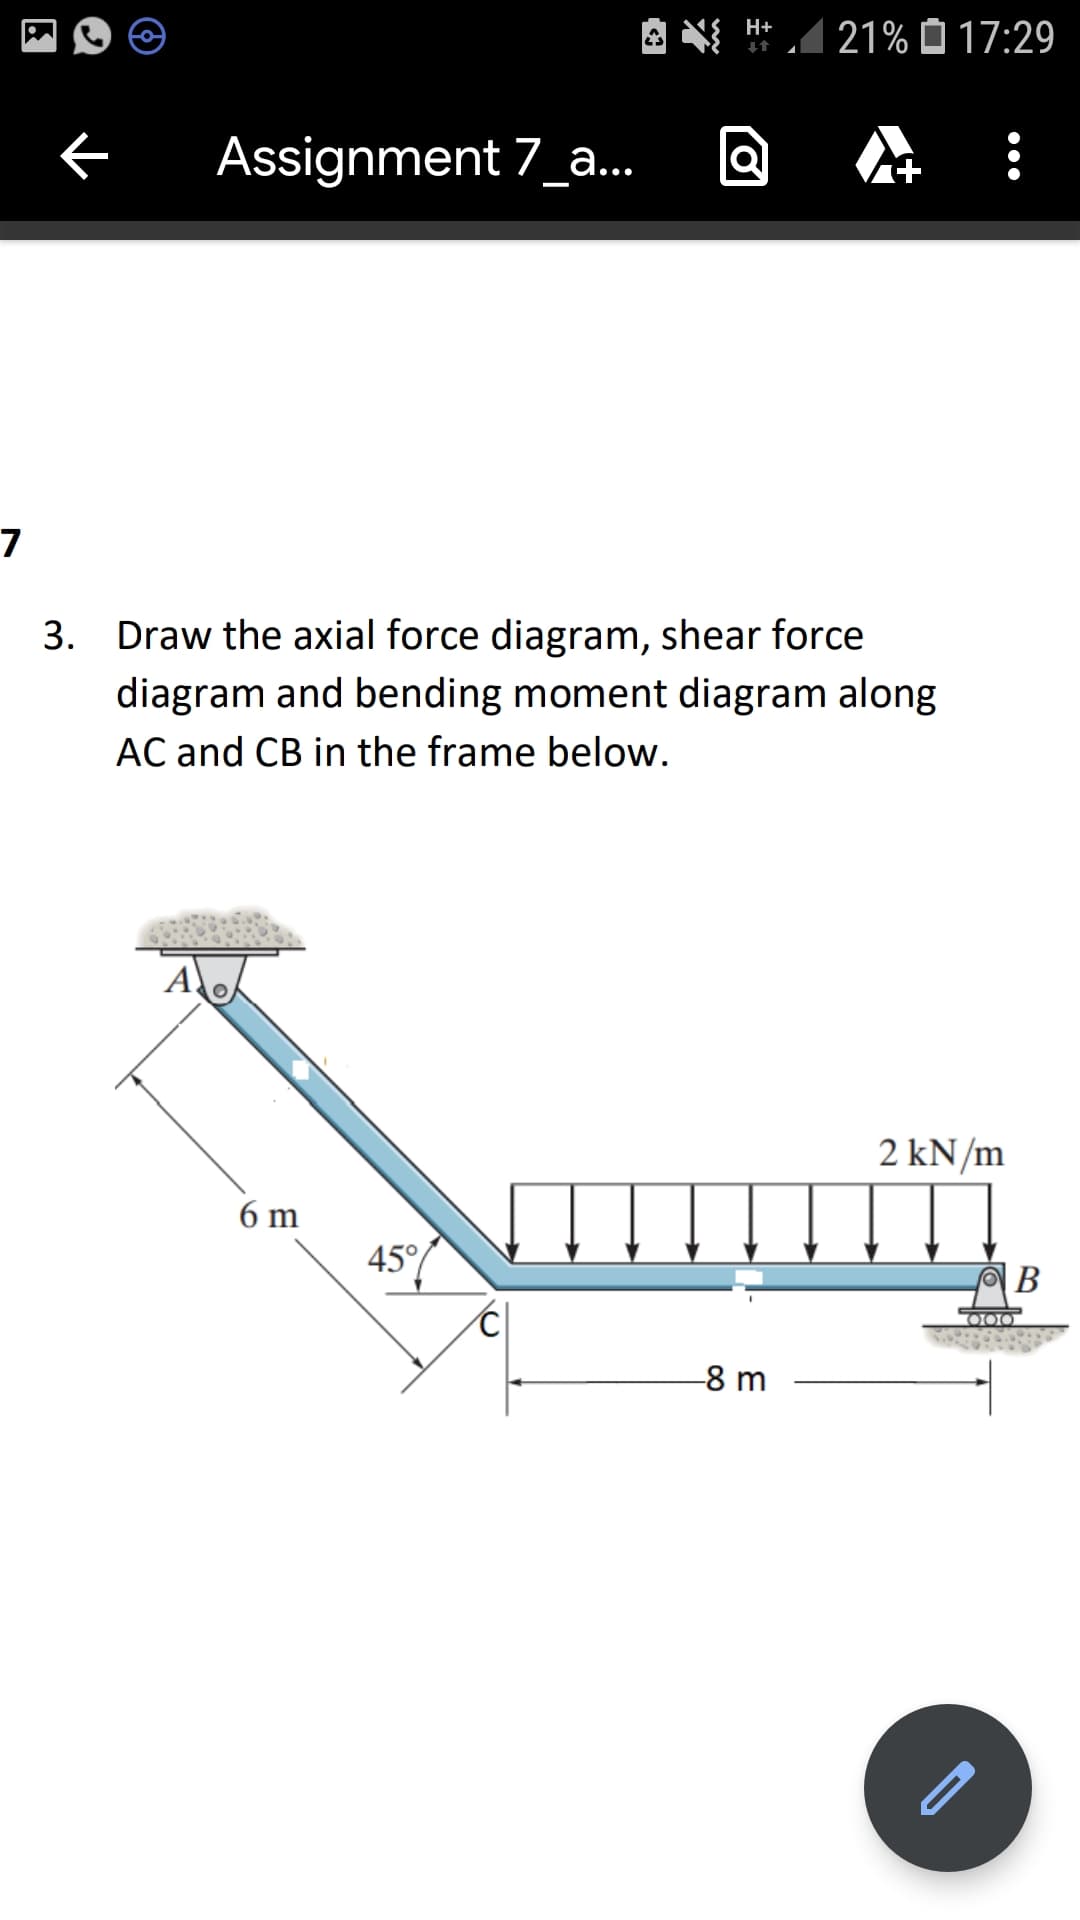 A N H*1
21% O 17:29
Assignment 7_a.
7
3. Draw the axial force diagram, shear force
diagram and bending moment diagram along
AC and CB in the frame below.
A
2 kN/m
6 m
45°/
В
O00
-8 m
